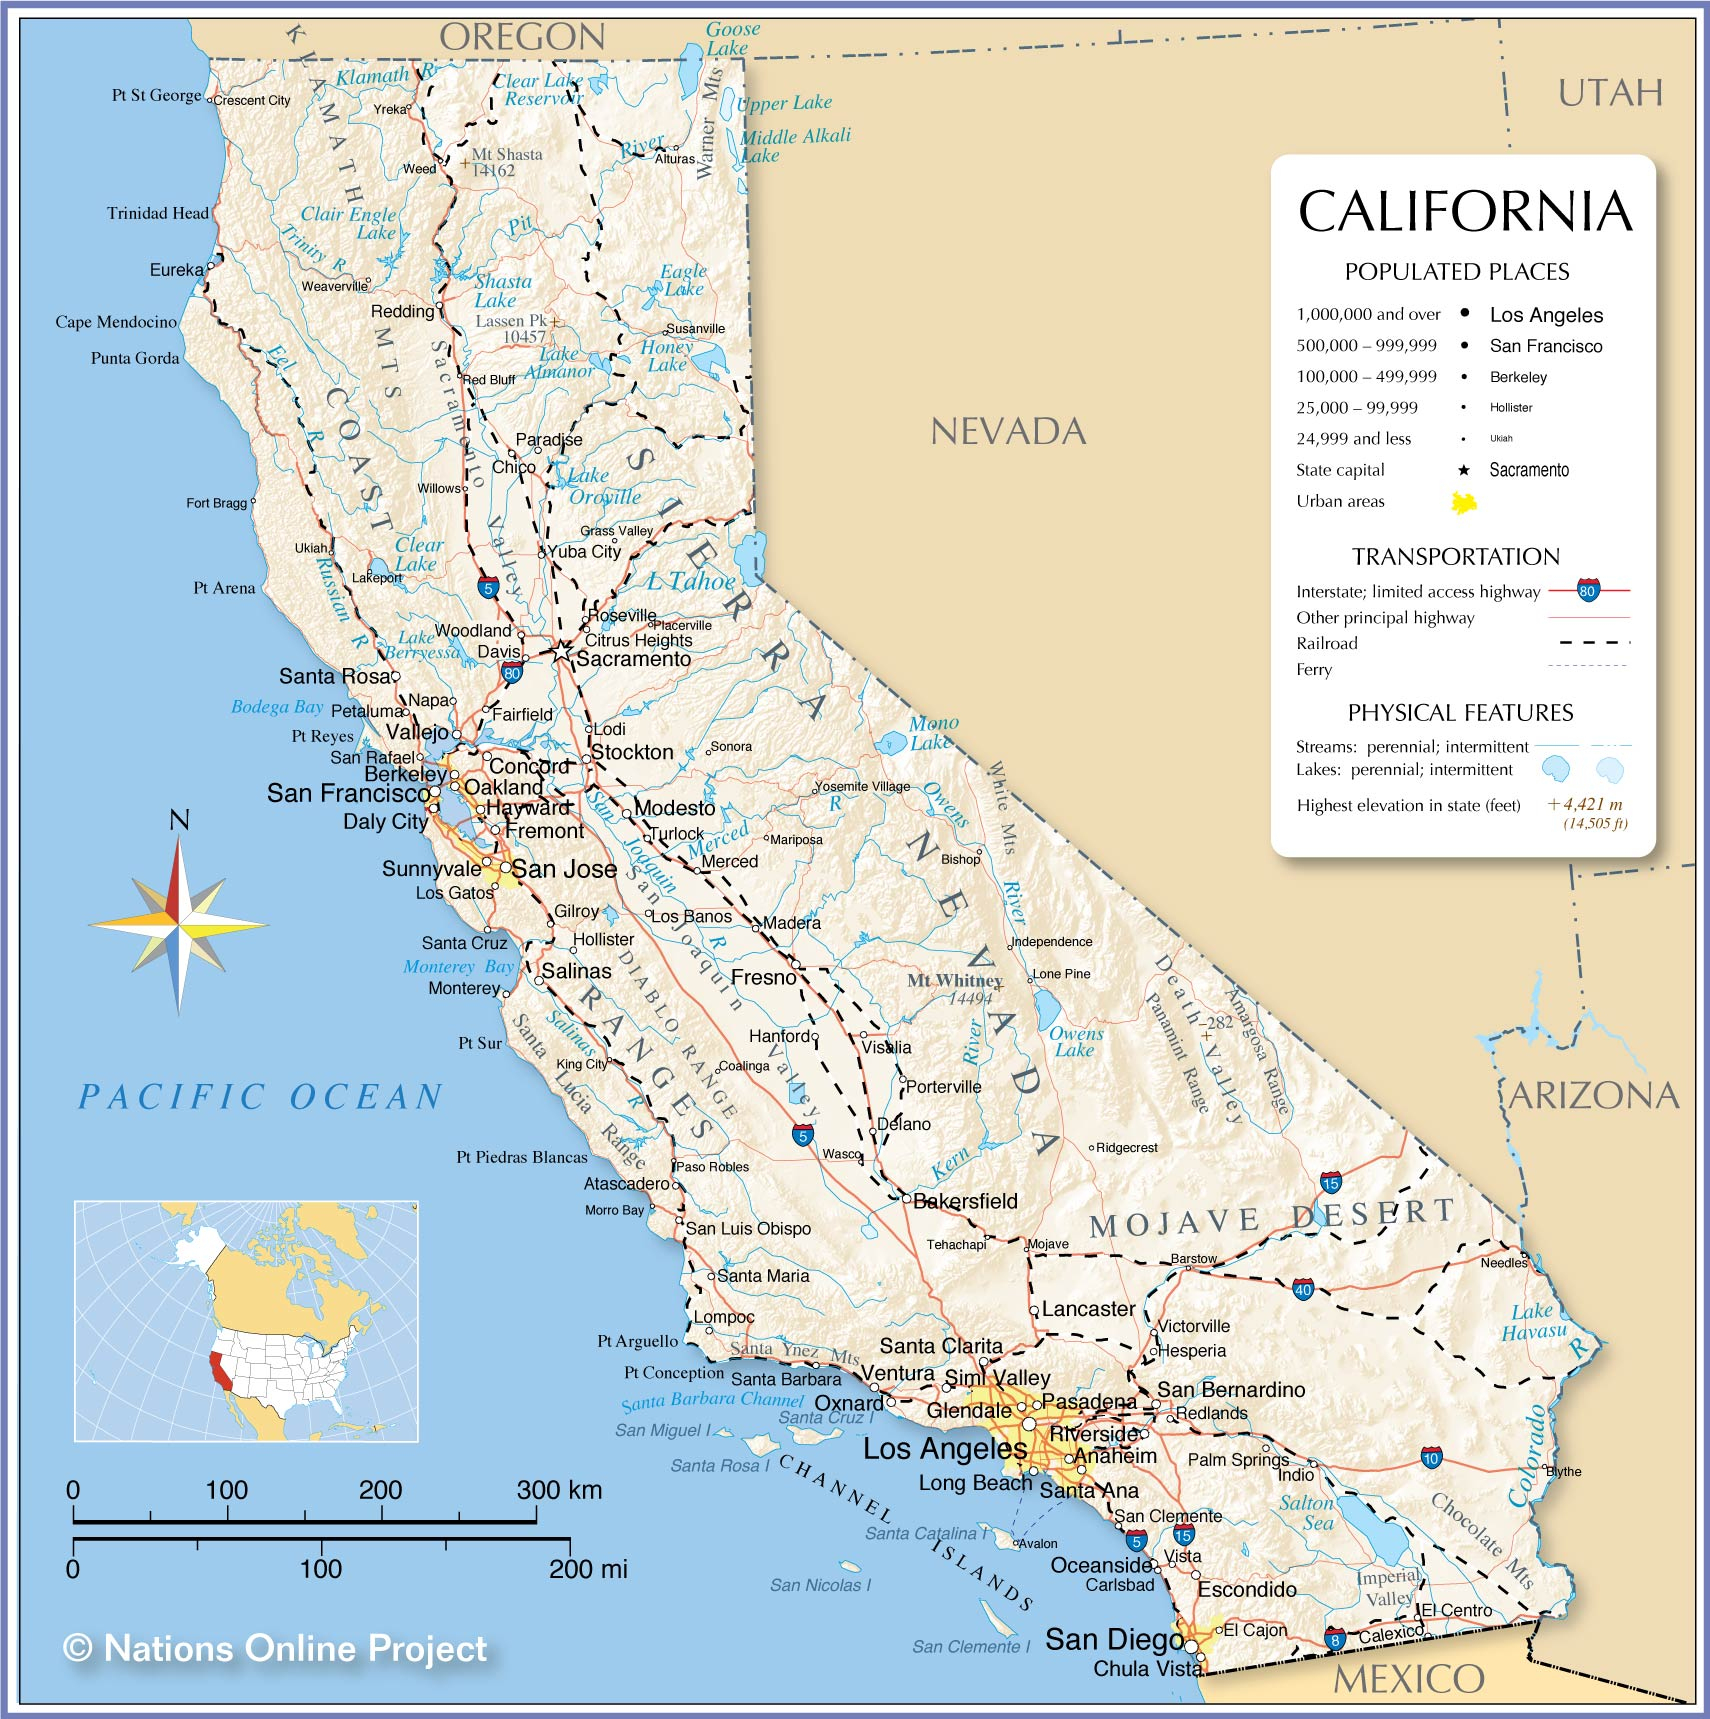 Reference Maps Of California, Usa - Nations Online Project - Road Map Of California Usa